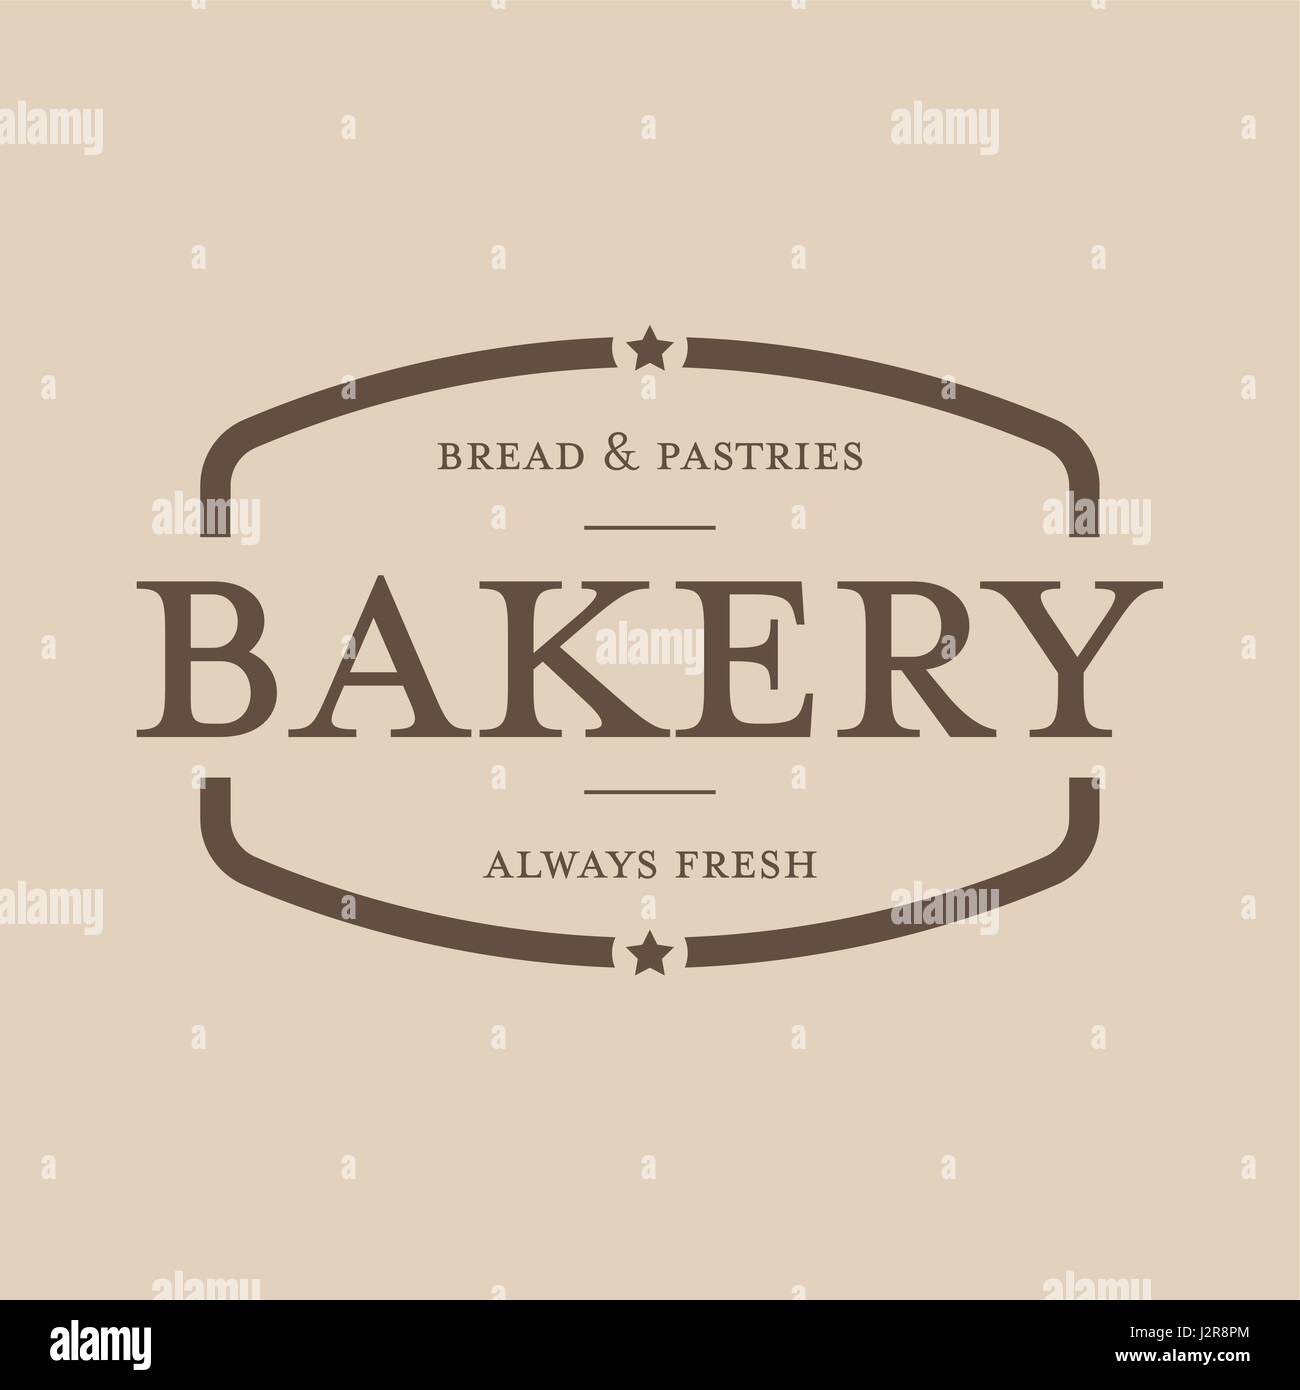 Bakery Stock Vector Images - Alamy